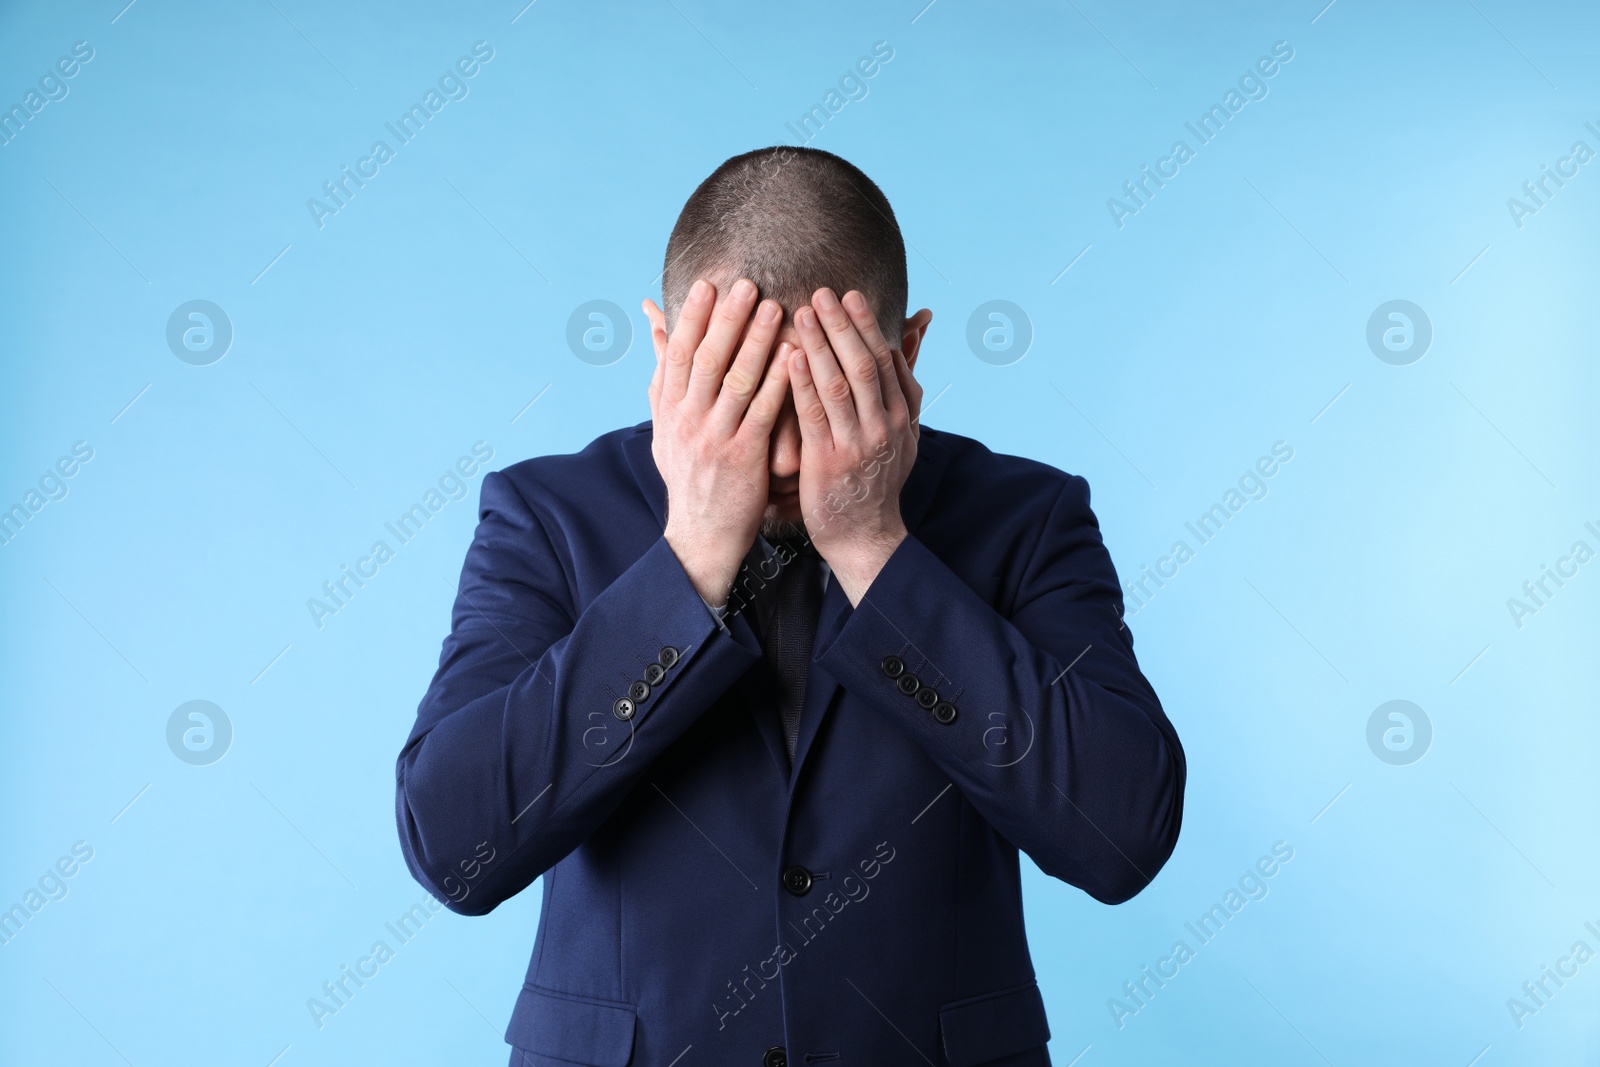 Photo of Upset man in suit closing his face with hands on light blue background